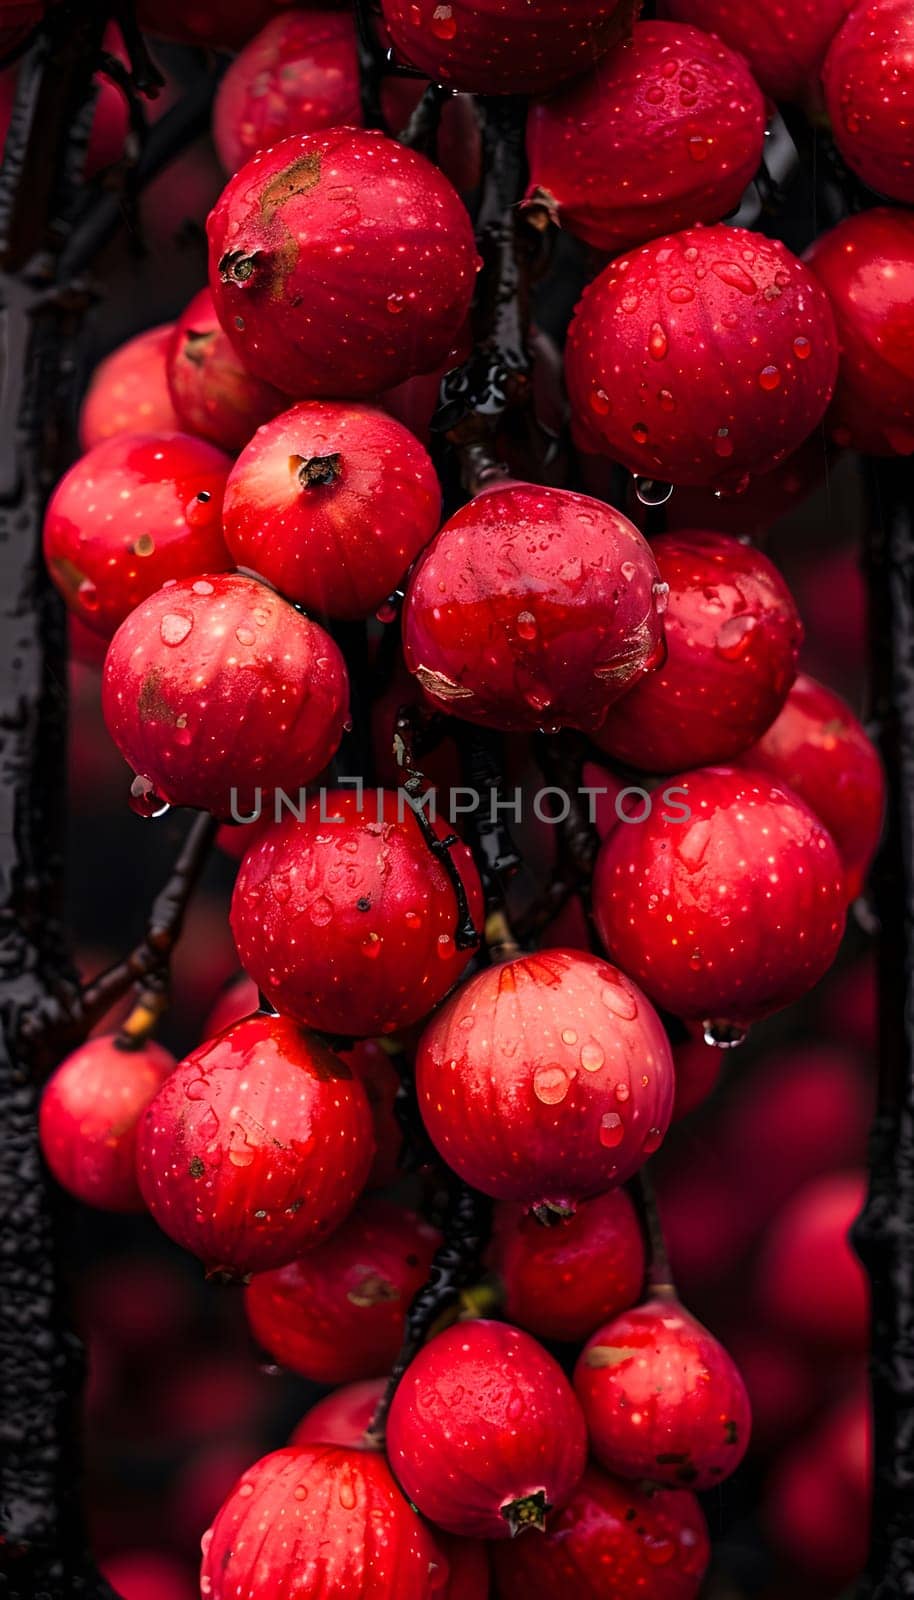 A cluster of vibrant red apples dangles from a tree branch, showcasing natures bounty of seedless fruit. These superfoods are delicious and nutritious ingredients for natural foods and recipes